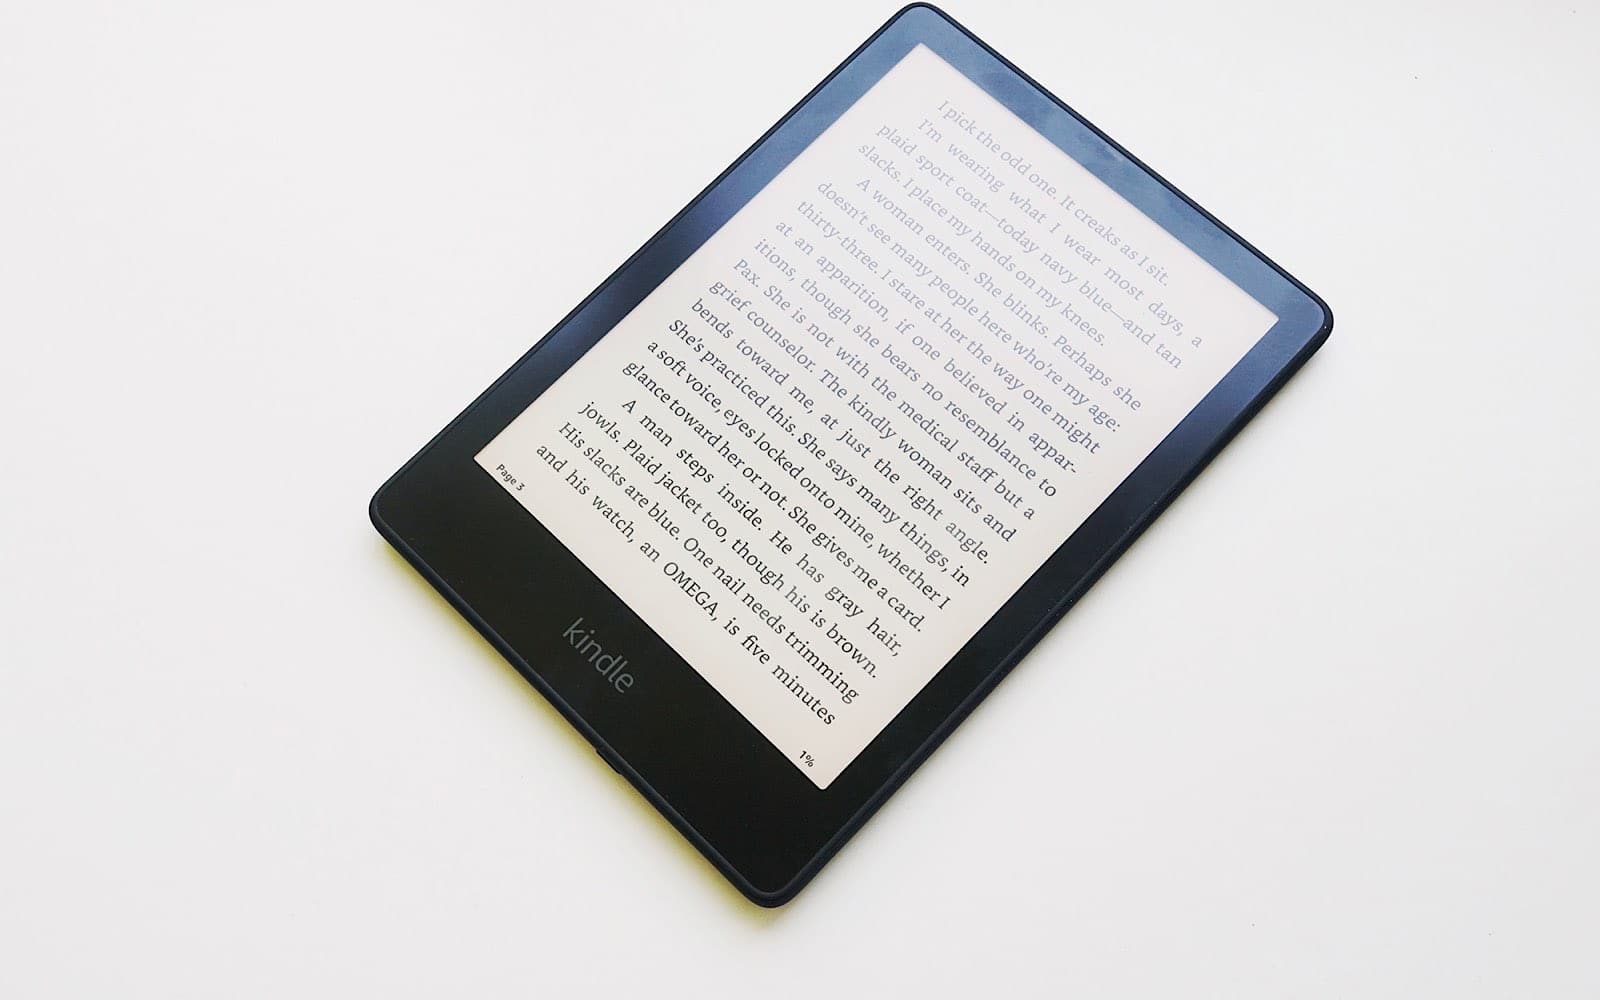 Amazon Kindle Paperwhite Signature Edition reviewed